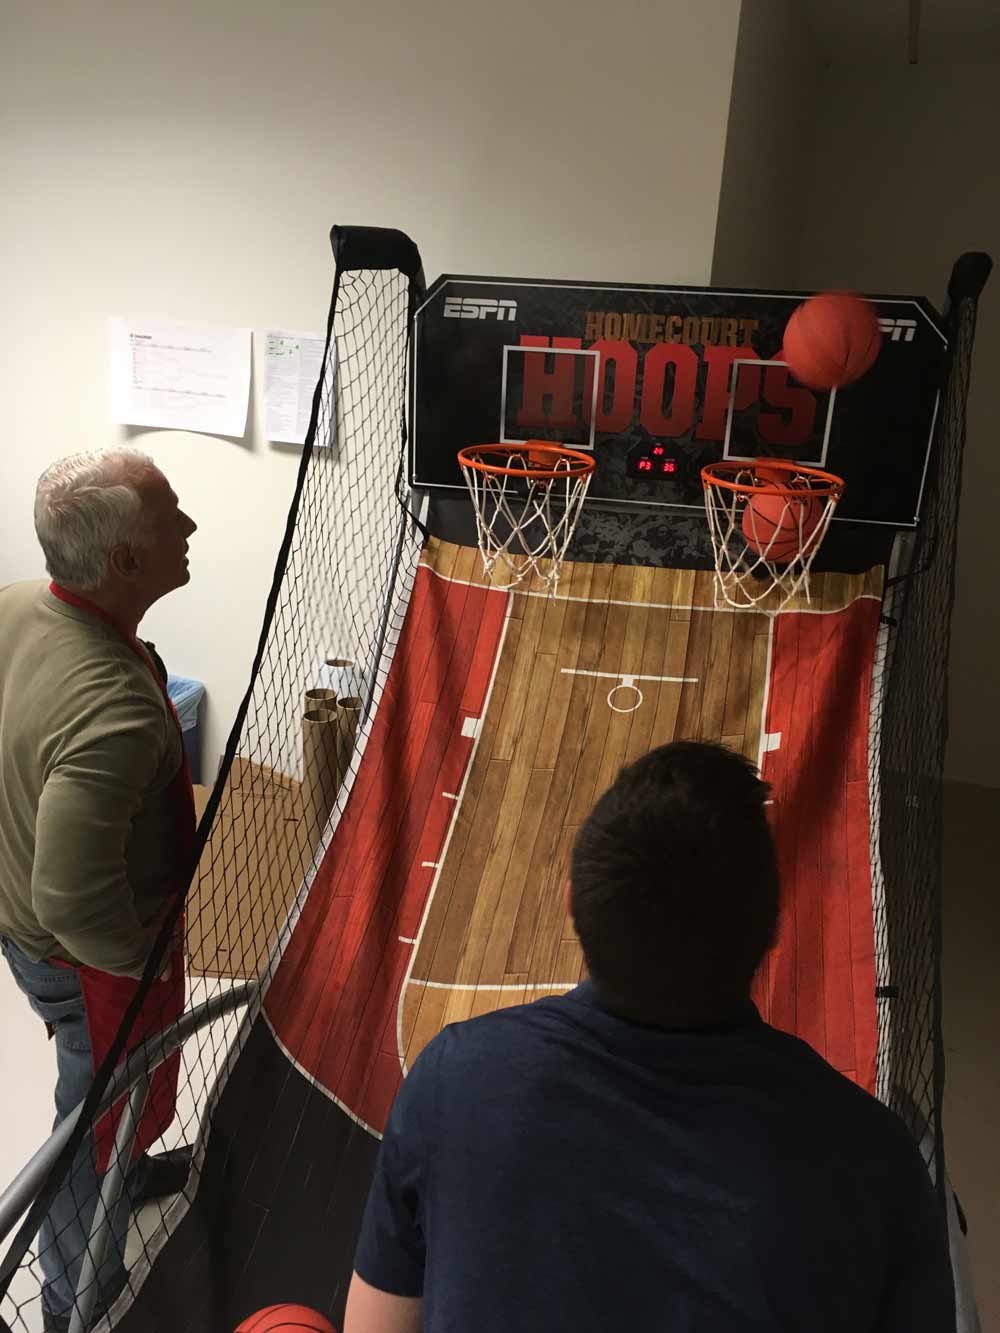 An intense game of basketball for March Madness has been known to break out.